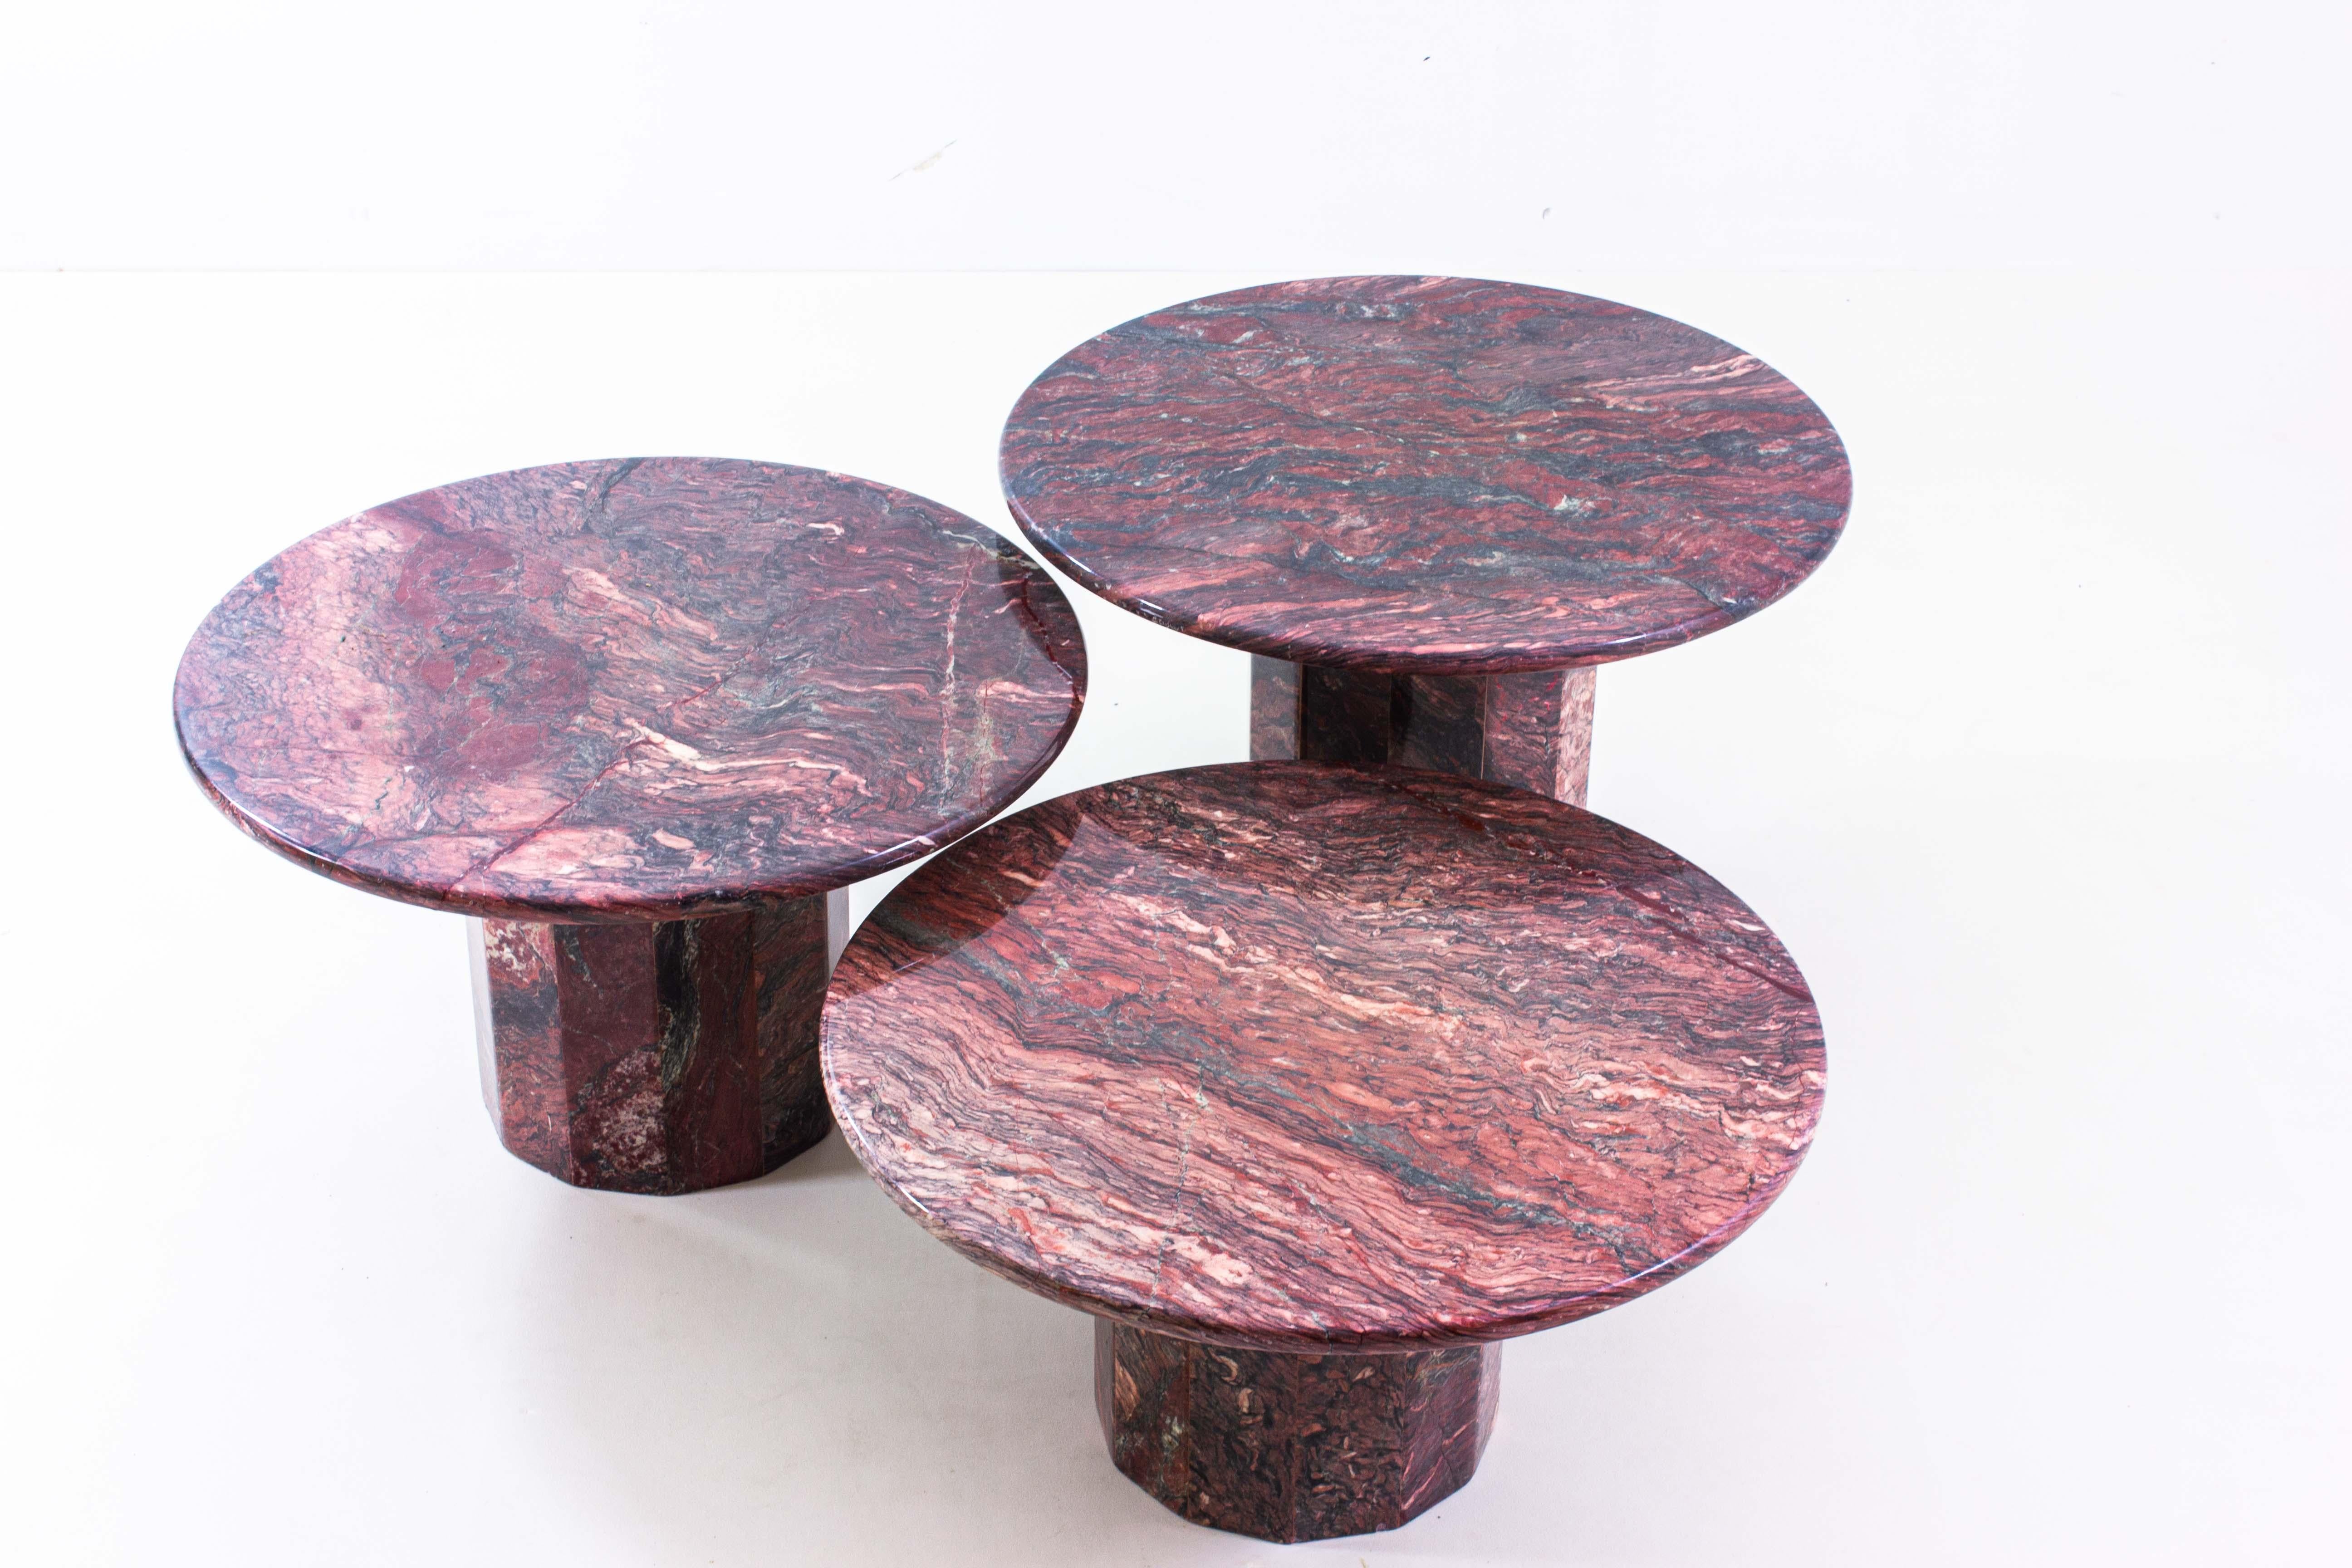 This hard to find set of 3 round coffee tables in burgundy wine red premium marble, comes in an exquisite condition.
The complex play of color within the table tops makes for a refined and elegant addition to any living room it will stand in.